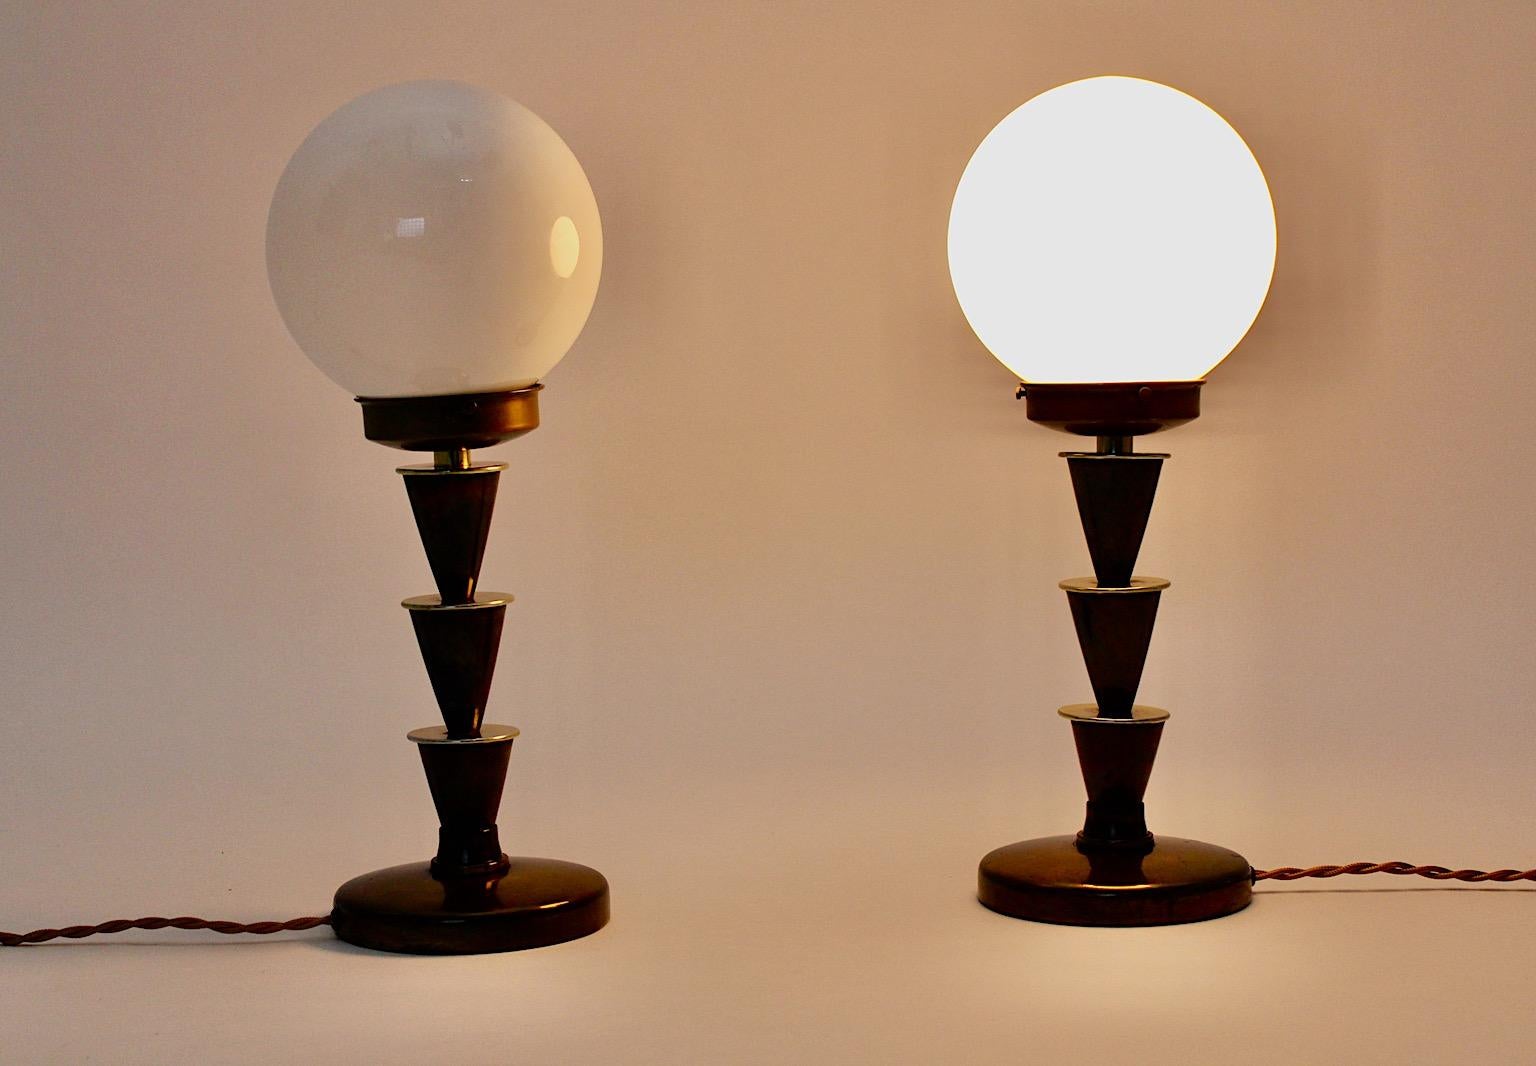 Art Deco pair of table lamp geometric style lollipop from brass with white round like opal glass shades 1930s Vienna.
While the geometric like metal bases show beautiful brass patina, the opal glass shades have no damage. Three screws hold each